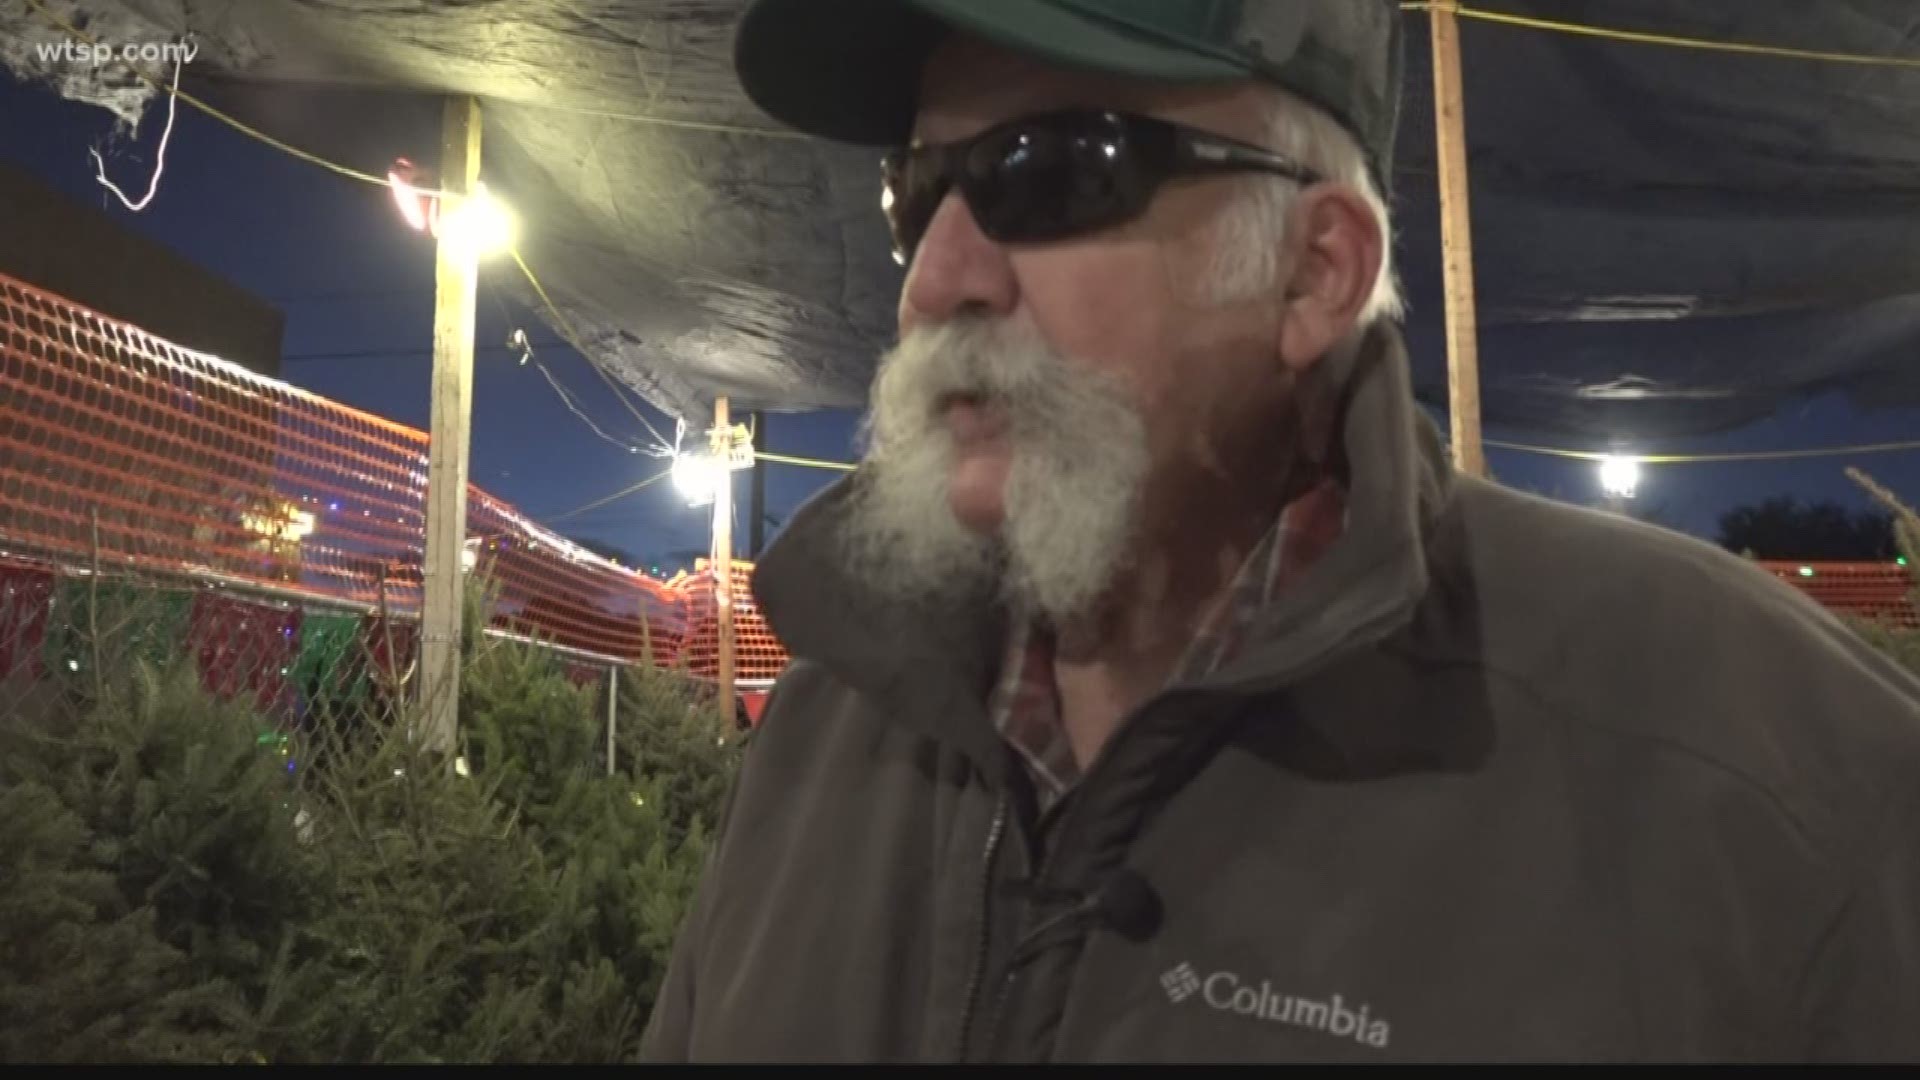 A recent study found the number of Christmas tree farmers is decreasing. Local farmers say they've noticed the trend. https://bit.ly/2OG6zIB